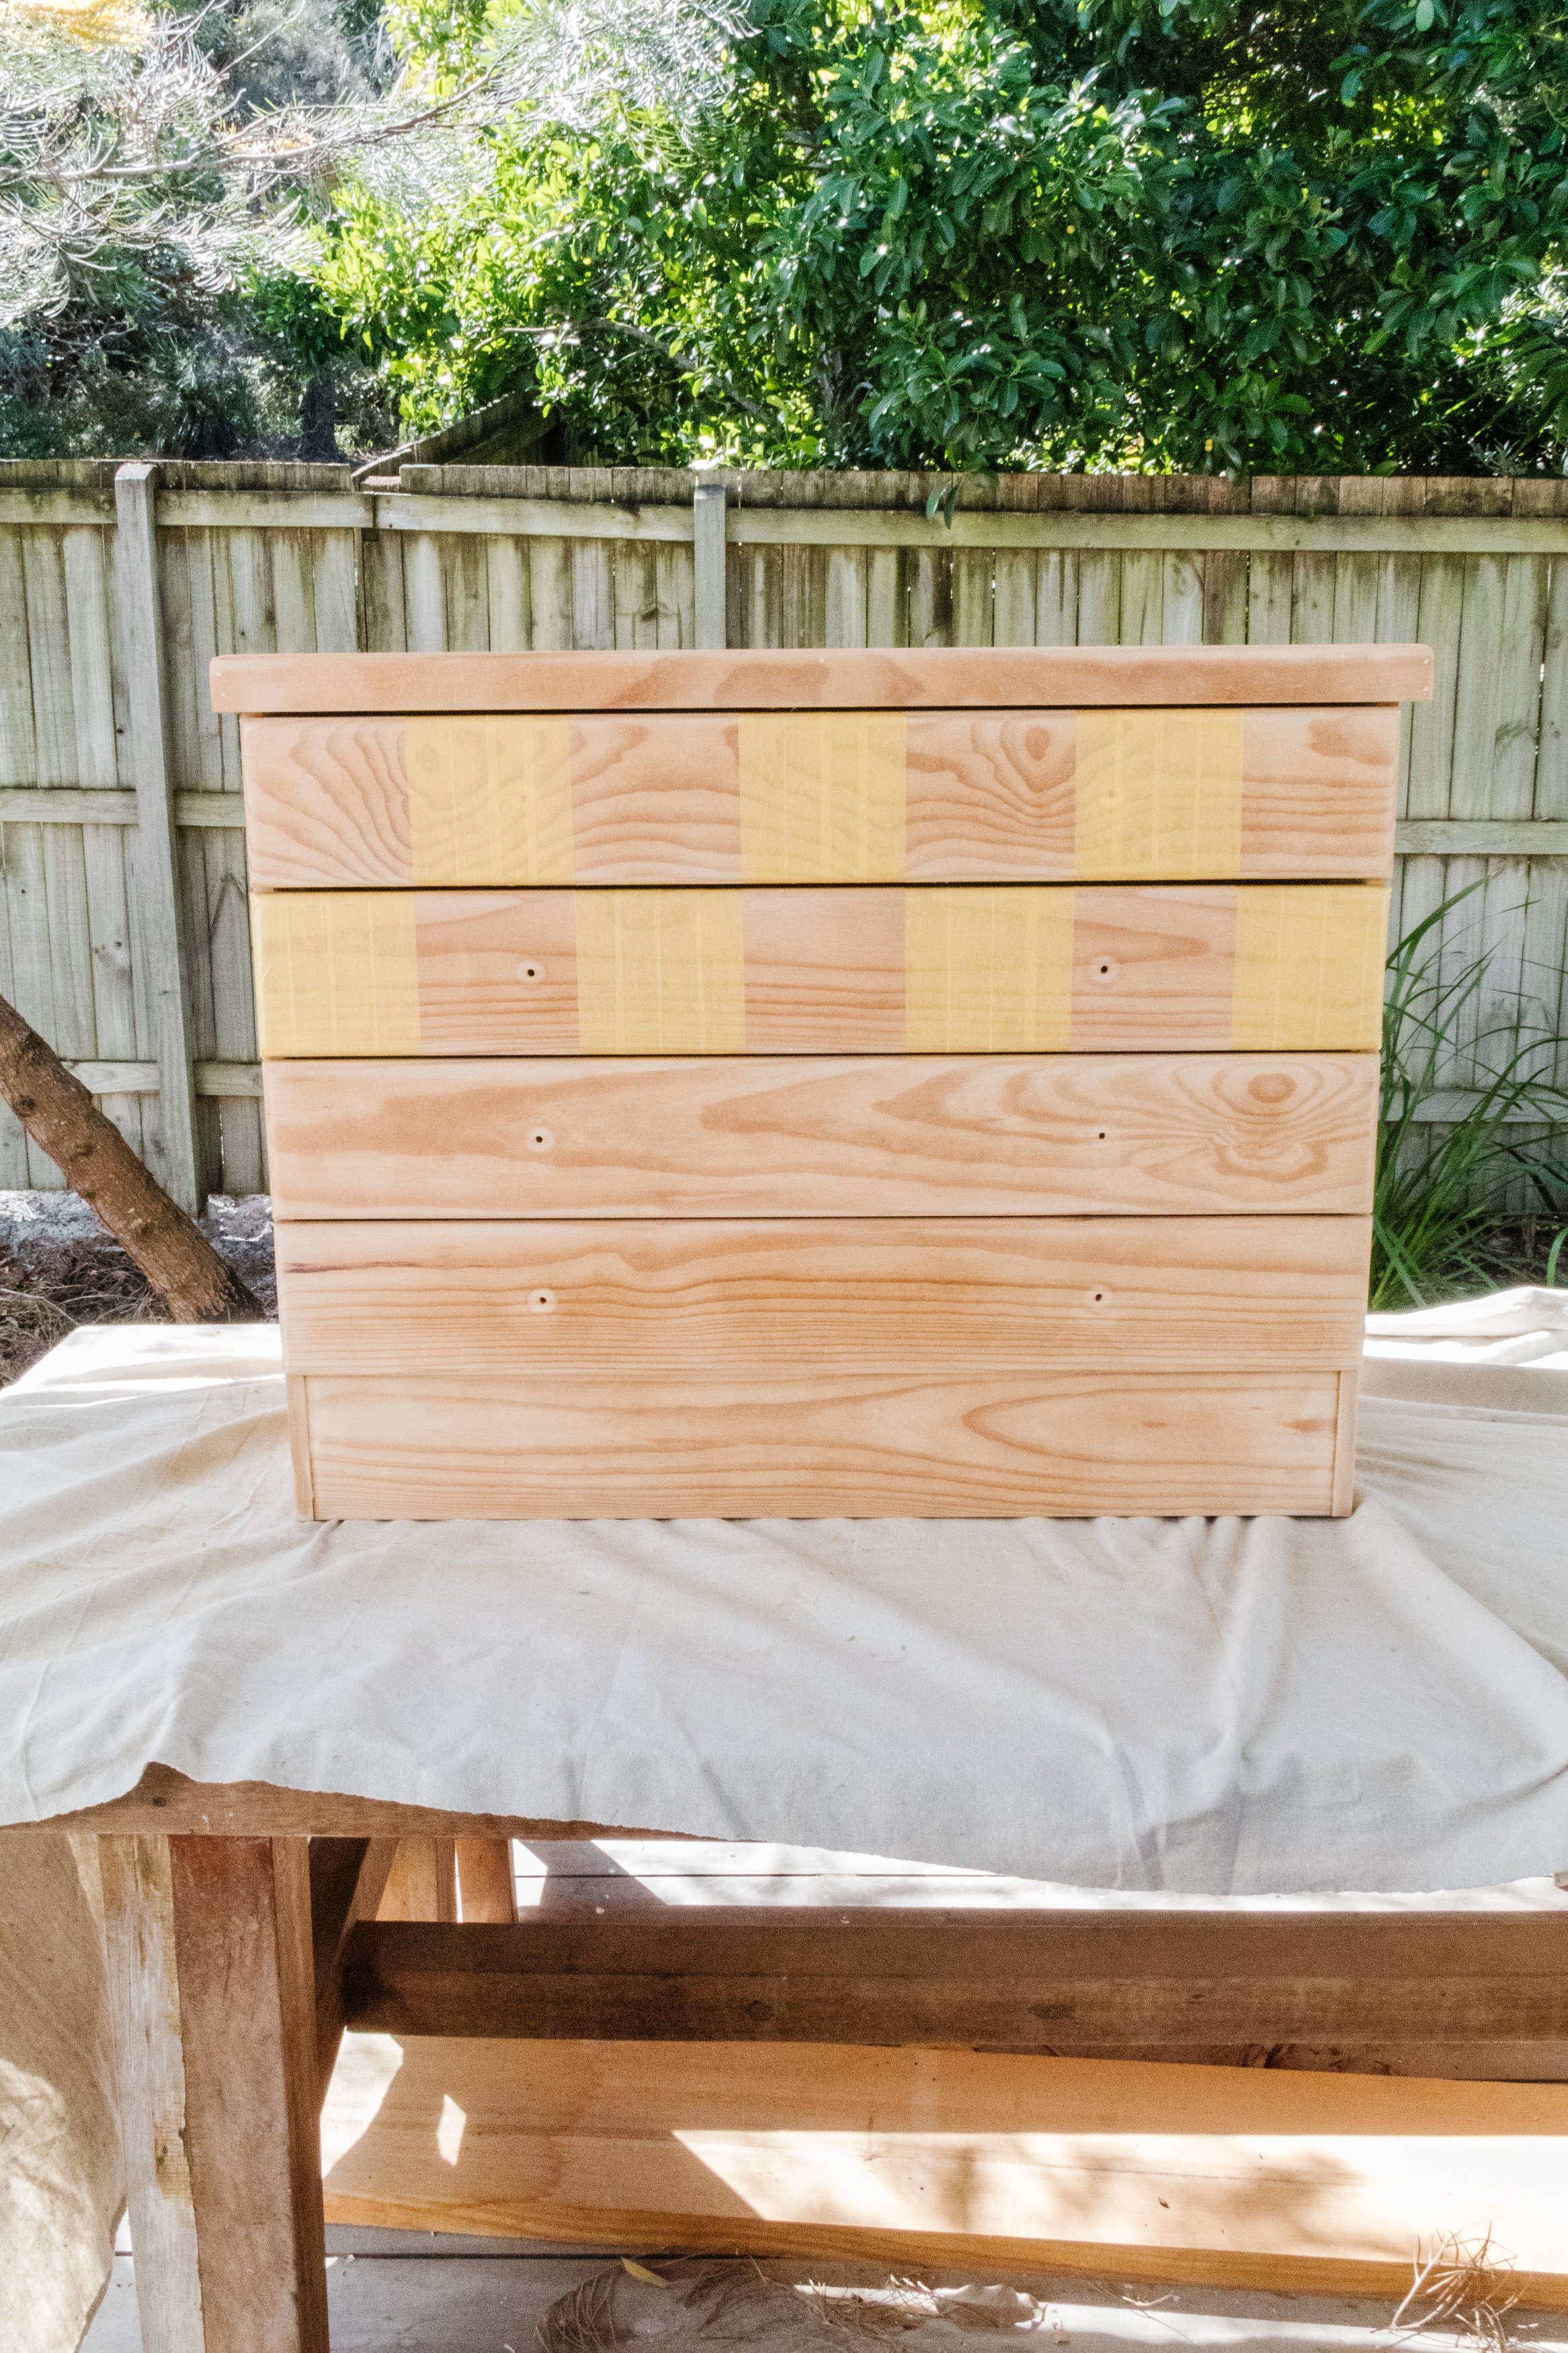 Upcycled Checker Timber Stained Drawers (7 of 42).jpg